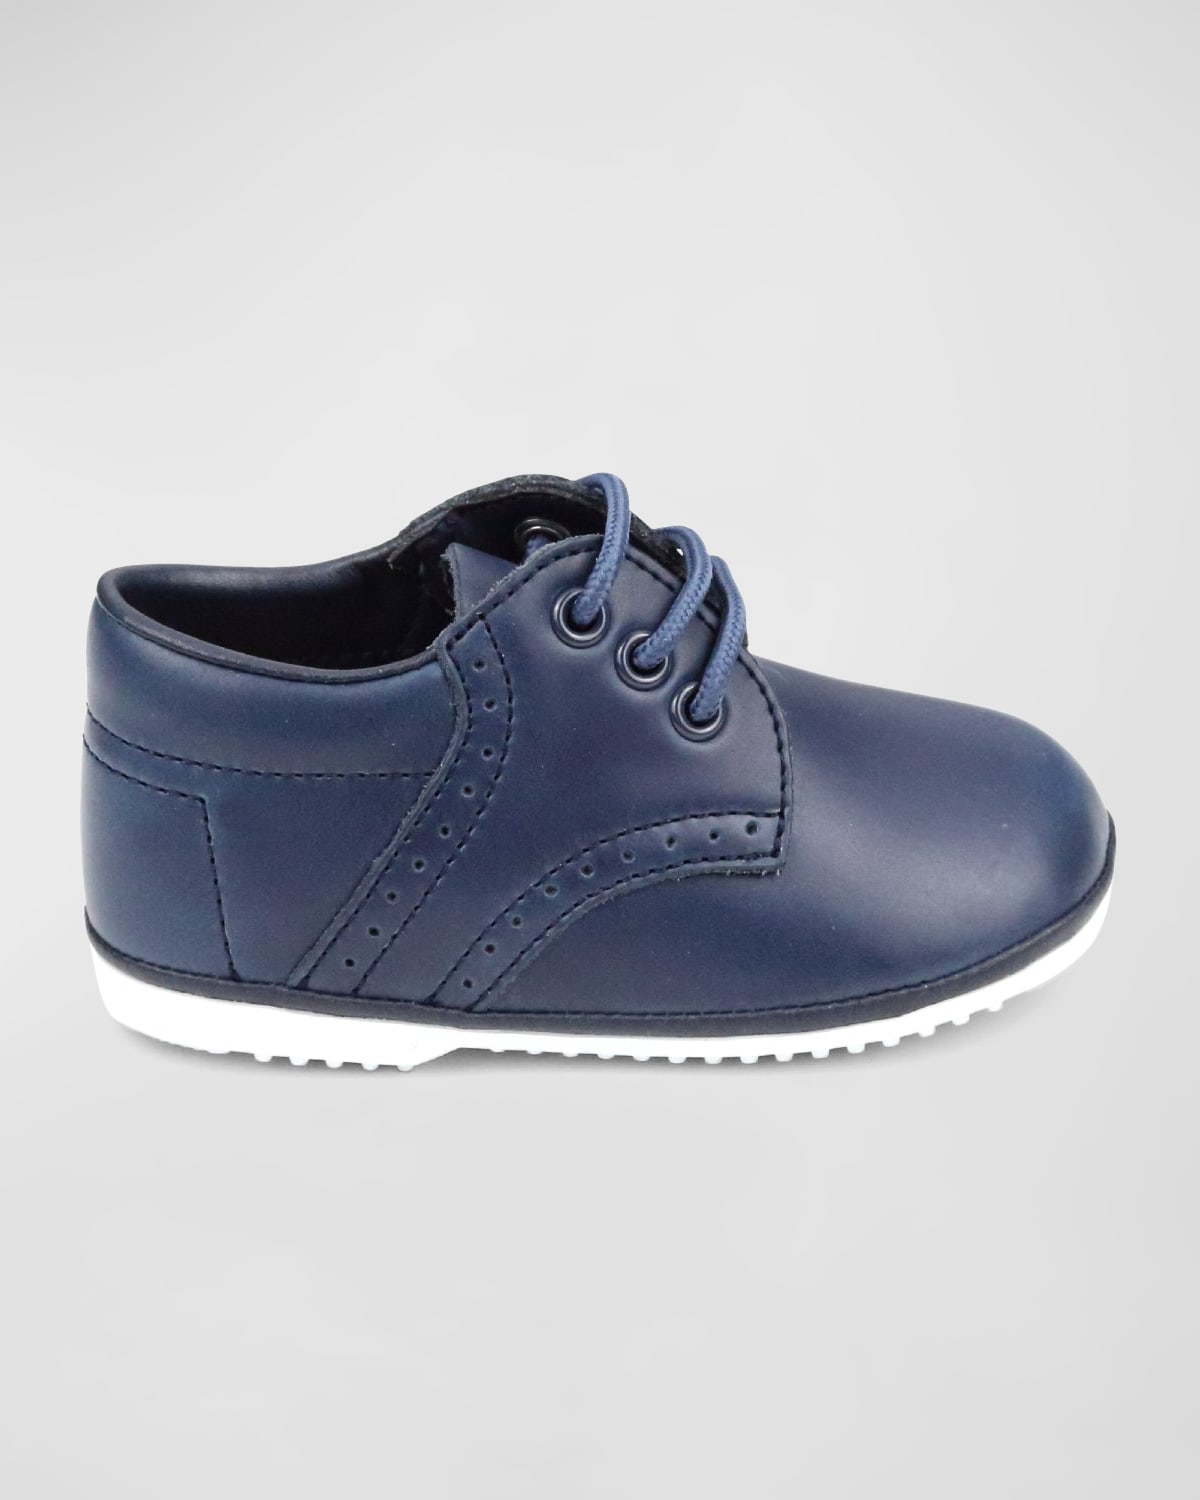 L'amour Shoes Kids' Boy's James Pre-walker Derby Shoes, Baby In Navy